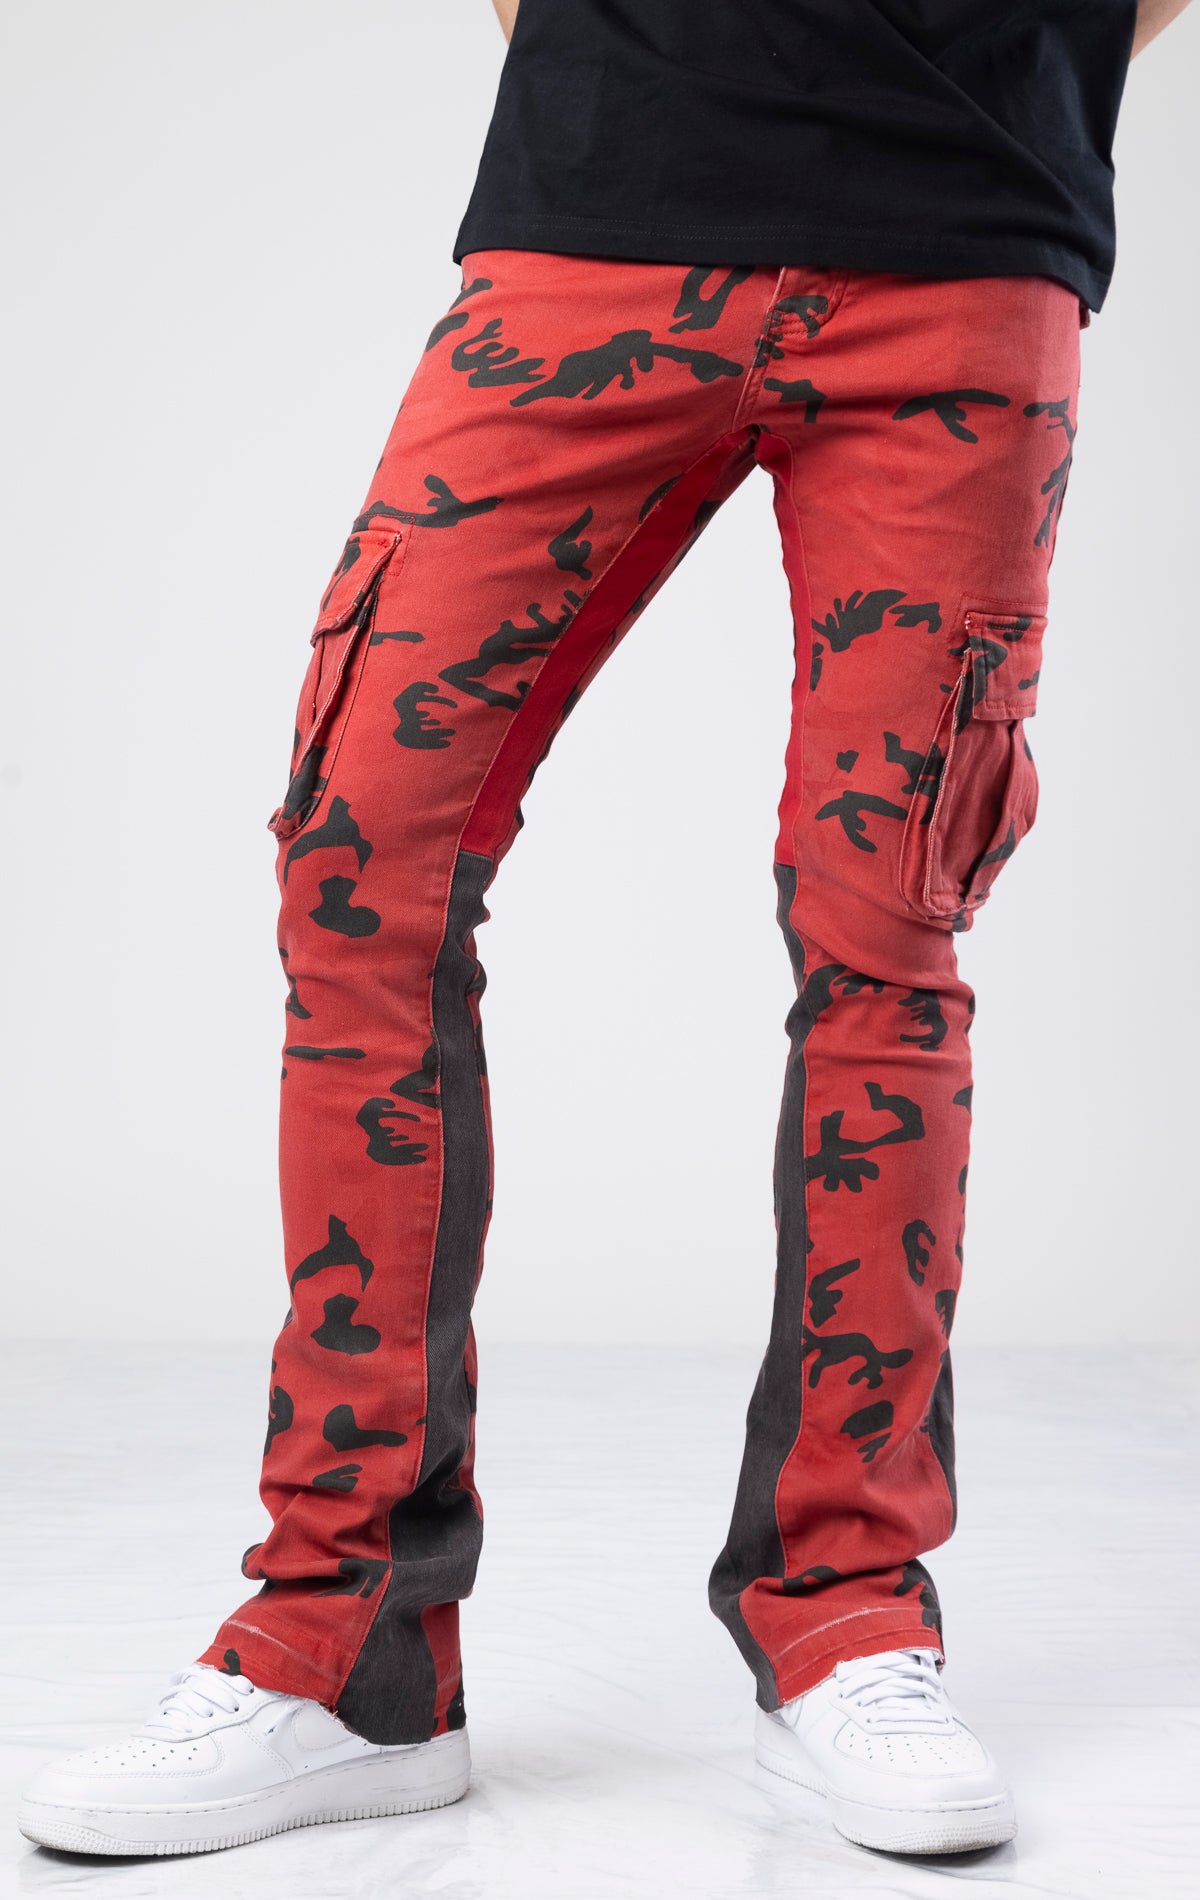 Red and black stacked flare denim jeans with a crimson forest all-over print. They have a contemporary, fitted silhouette that flares out from the knee. The jeans have multiple functional pockets with zipper details for closure and style. Made from a durable cotton blend with a touch of elastane for stretch and comfort, these jeans also include belt loops for added adjustability.